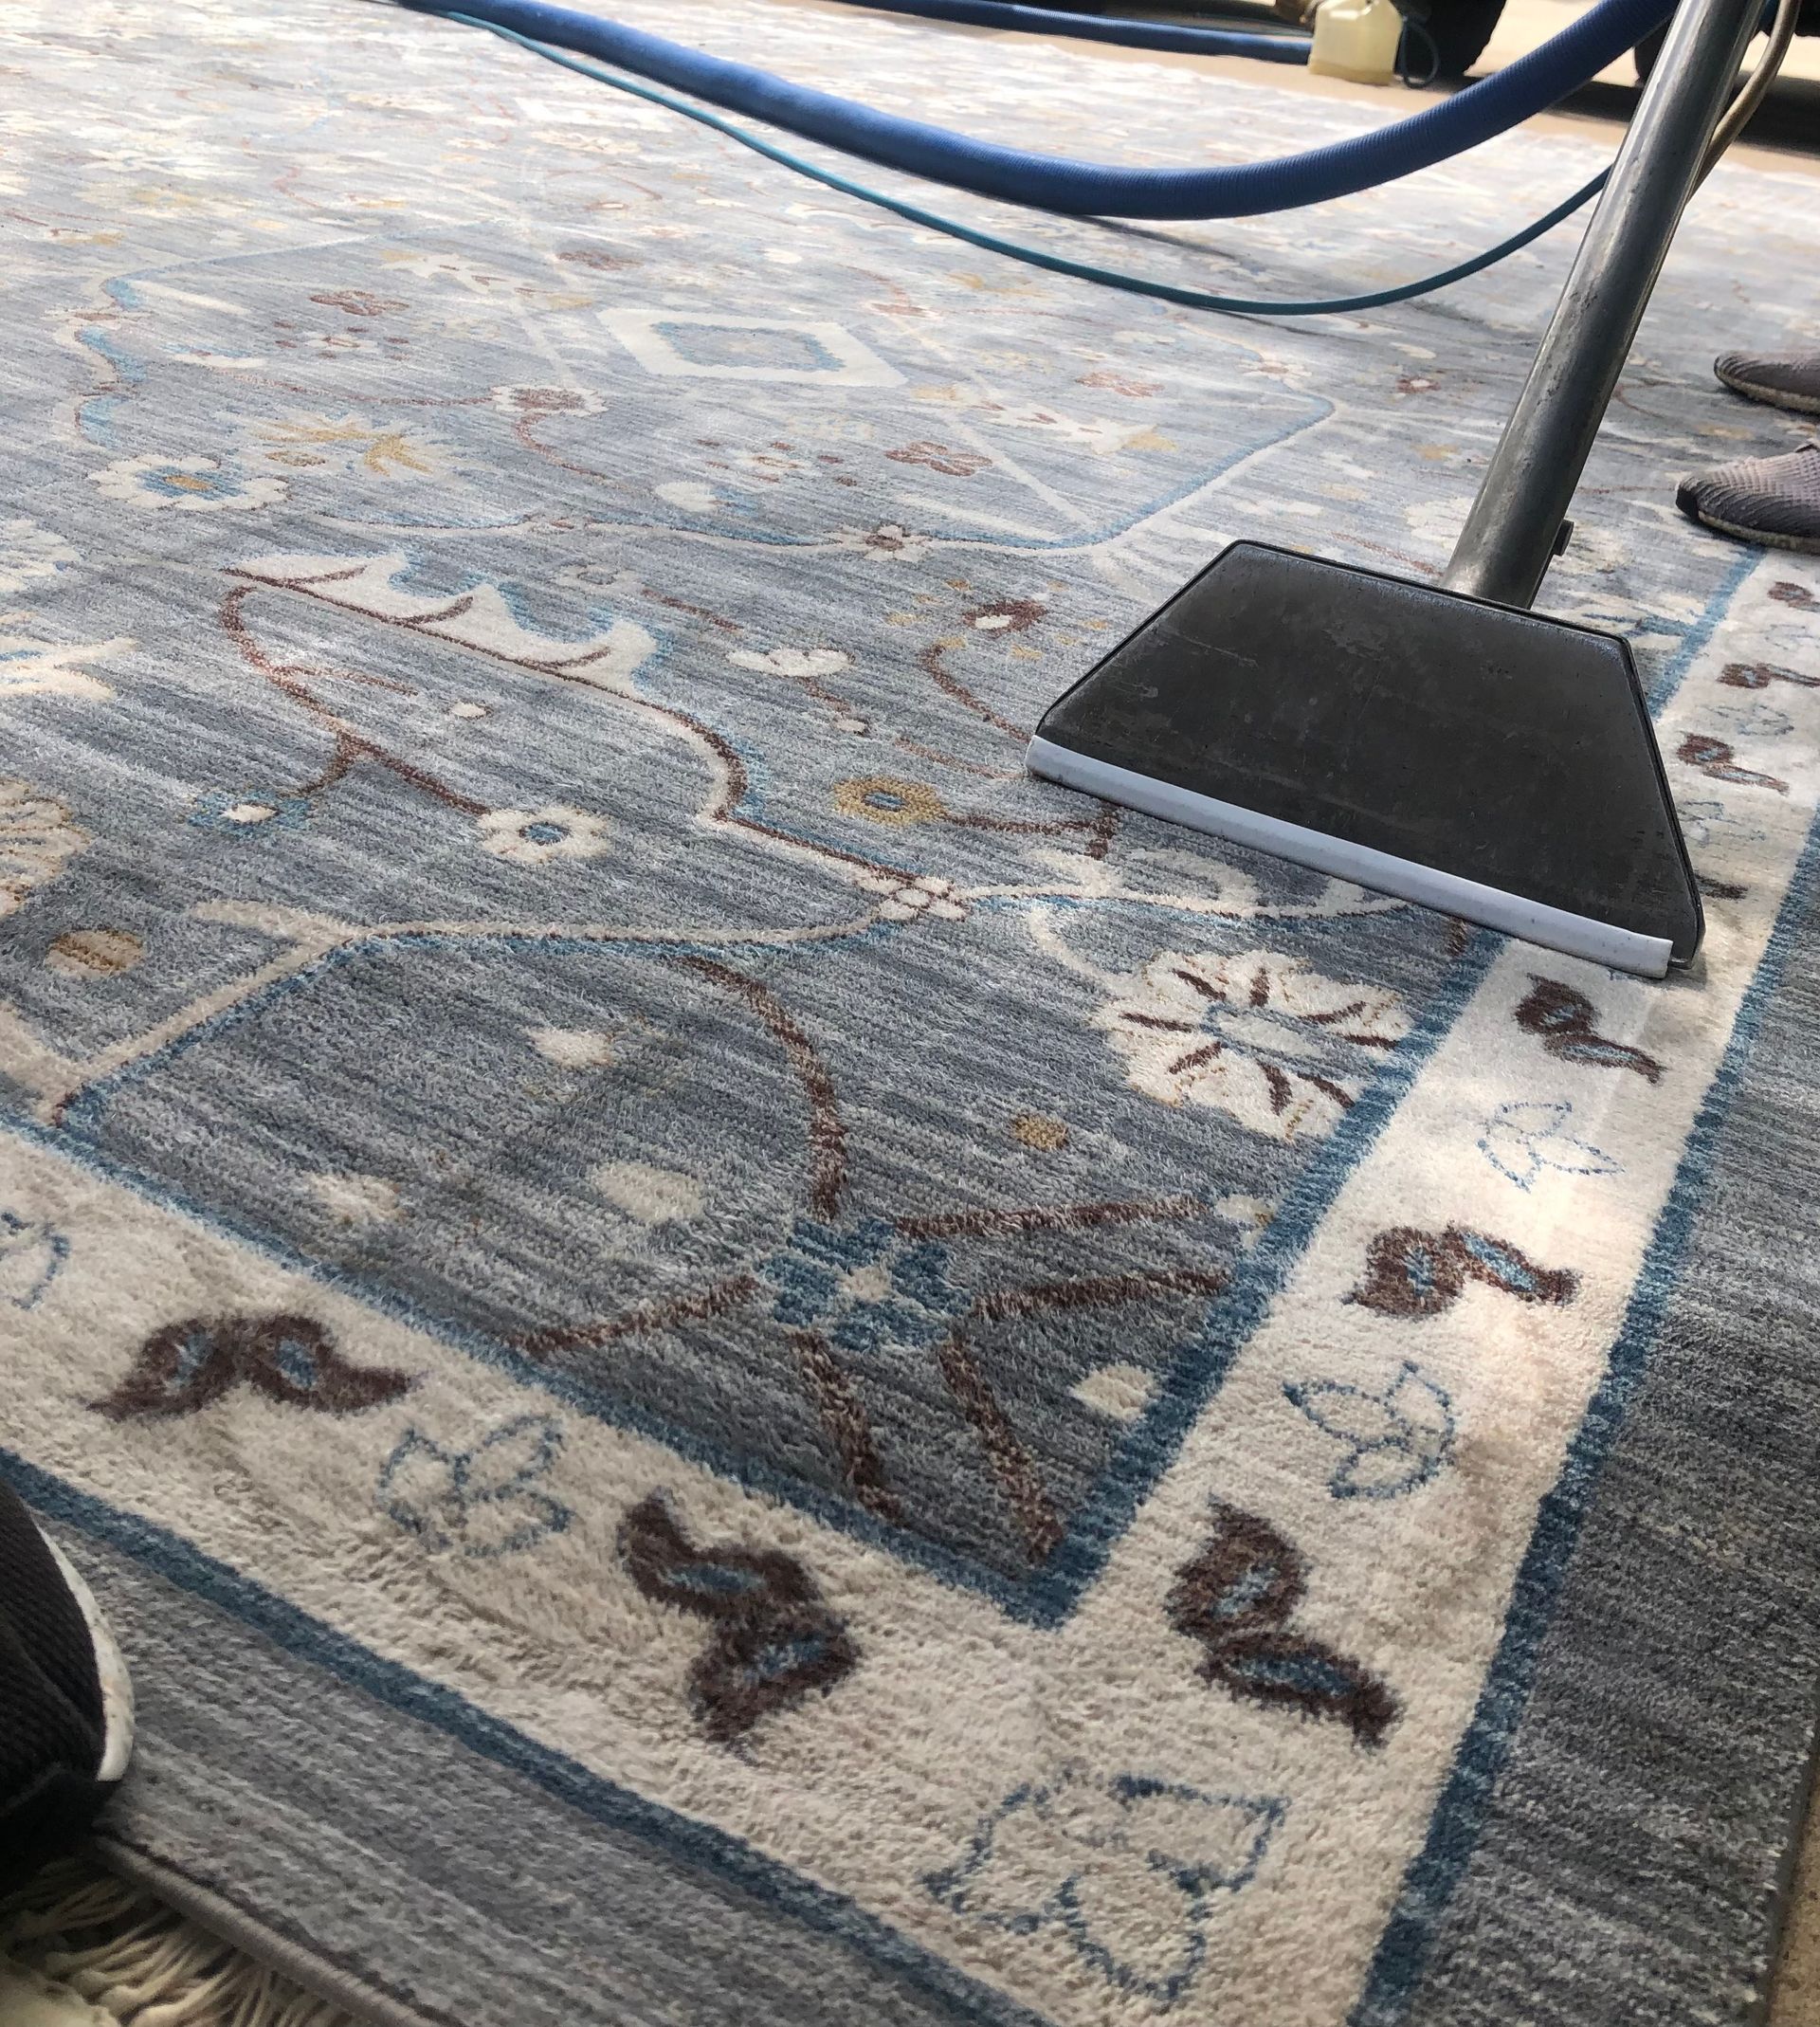 1 For Rug Cleaning In Katy Tx 5 Star Reviews